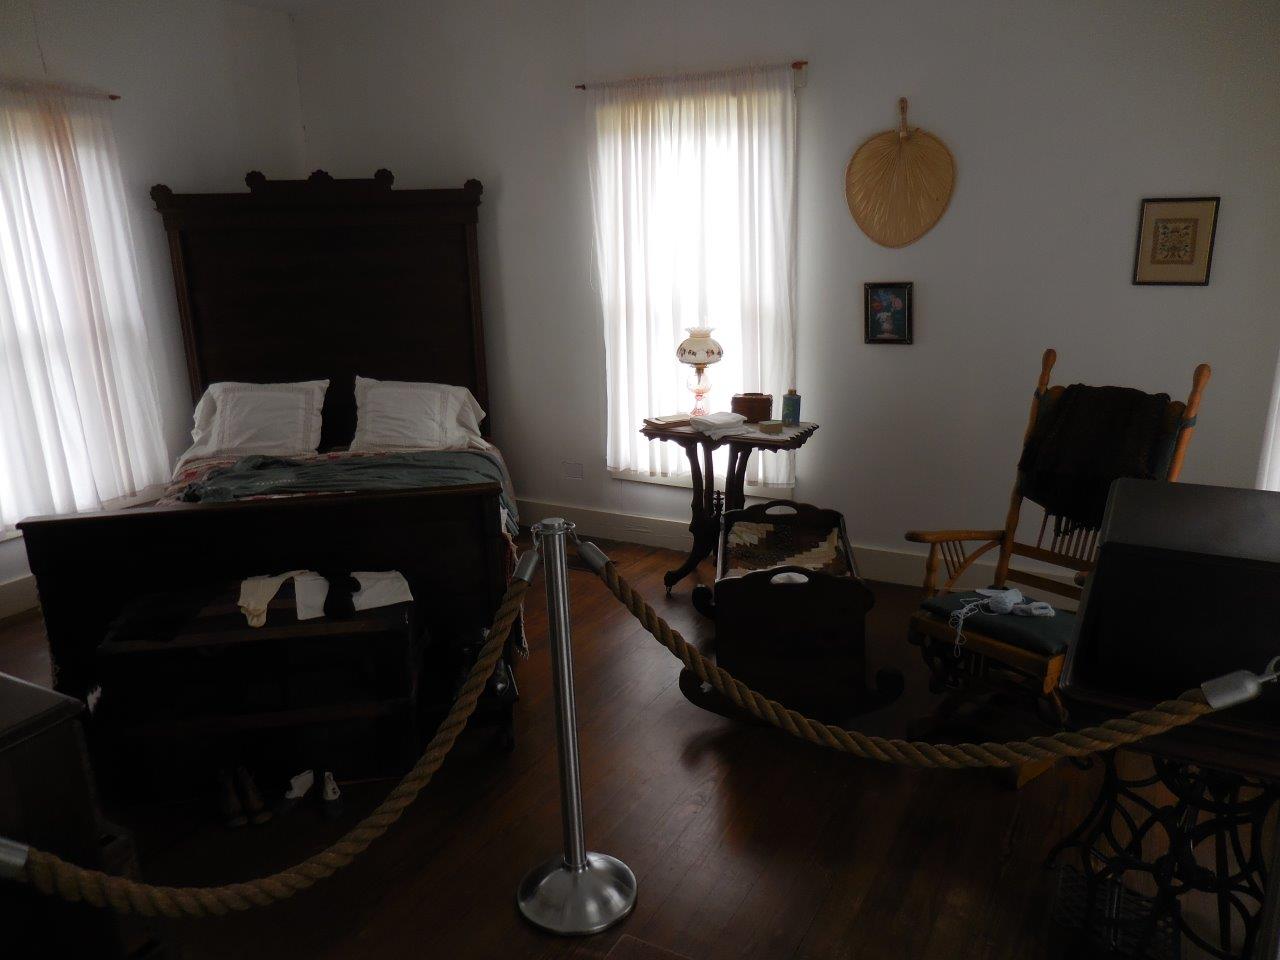 room in which Dwight Eisenhower was born